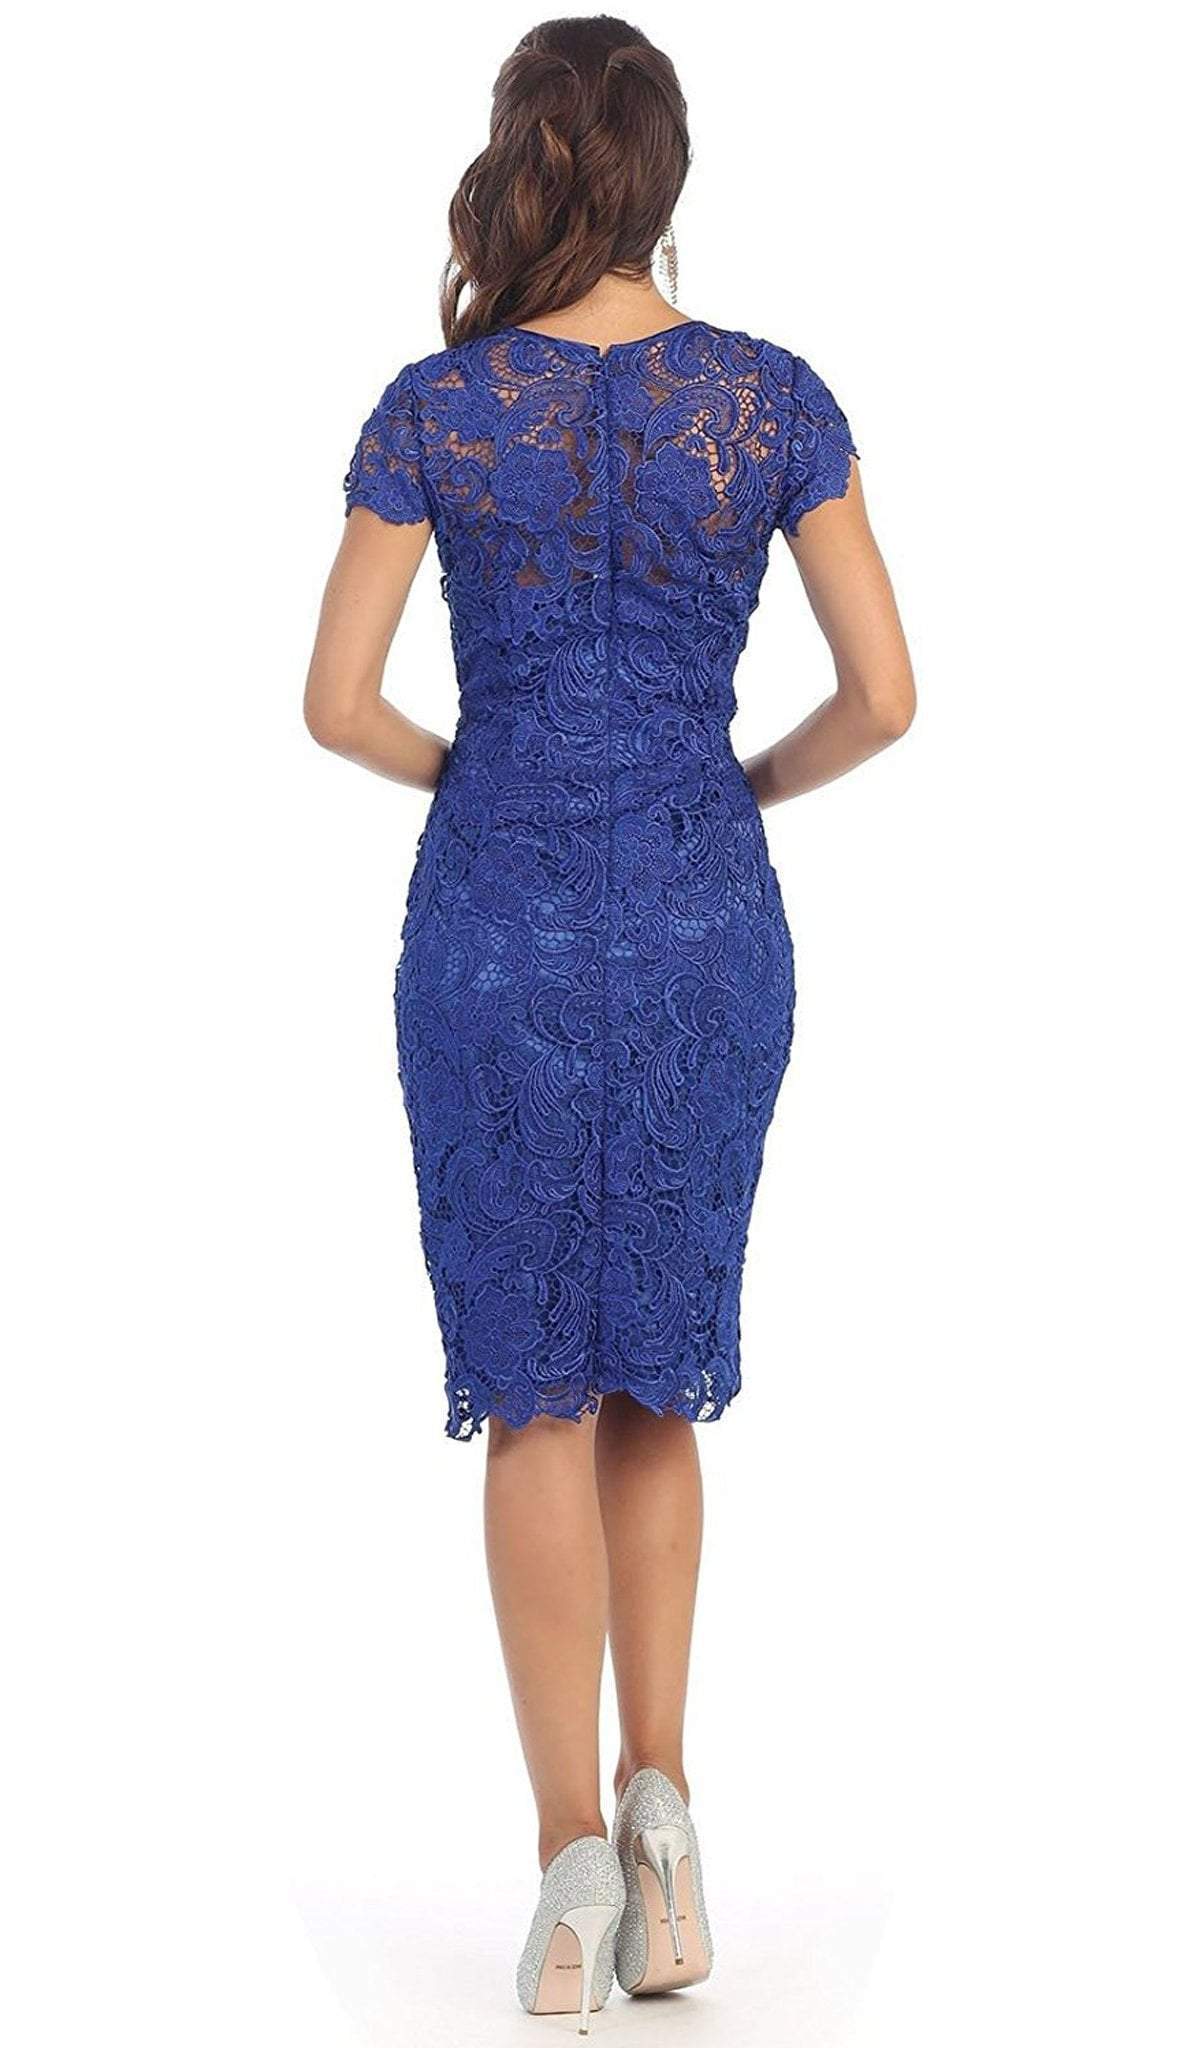 May Queen - Short Sleeve Sheer Scalloped Lace Formal Dress Special Occasion Dress